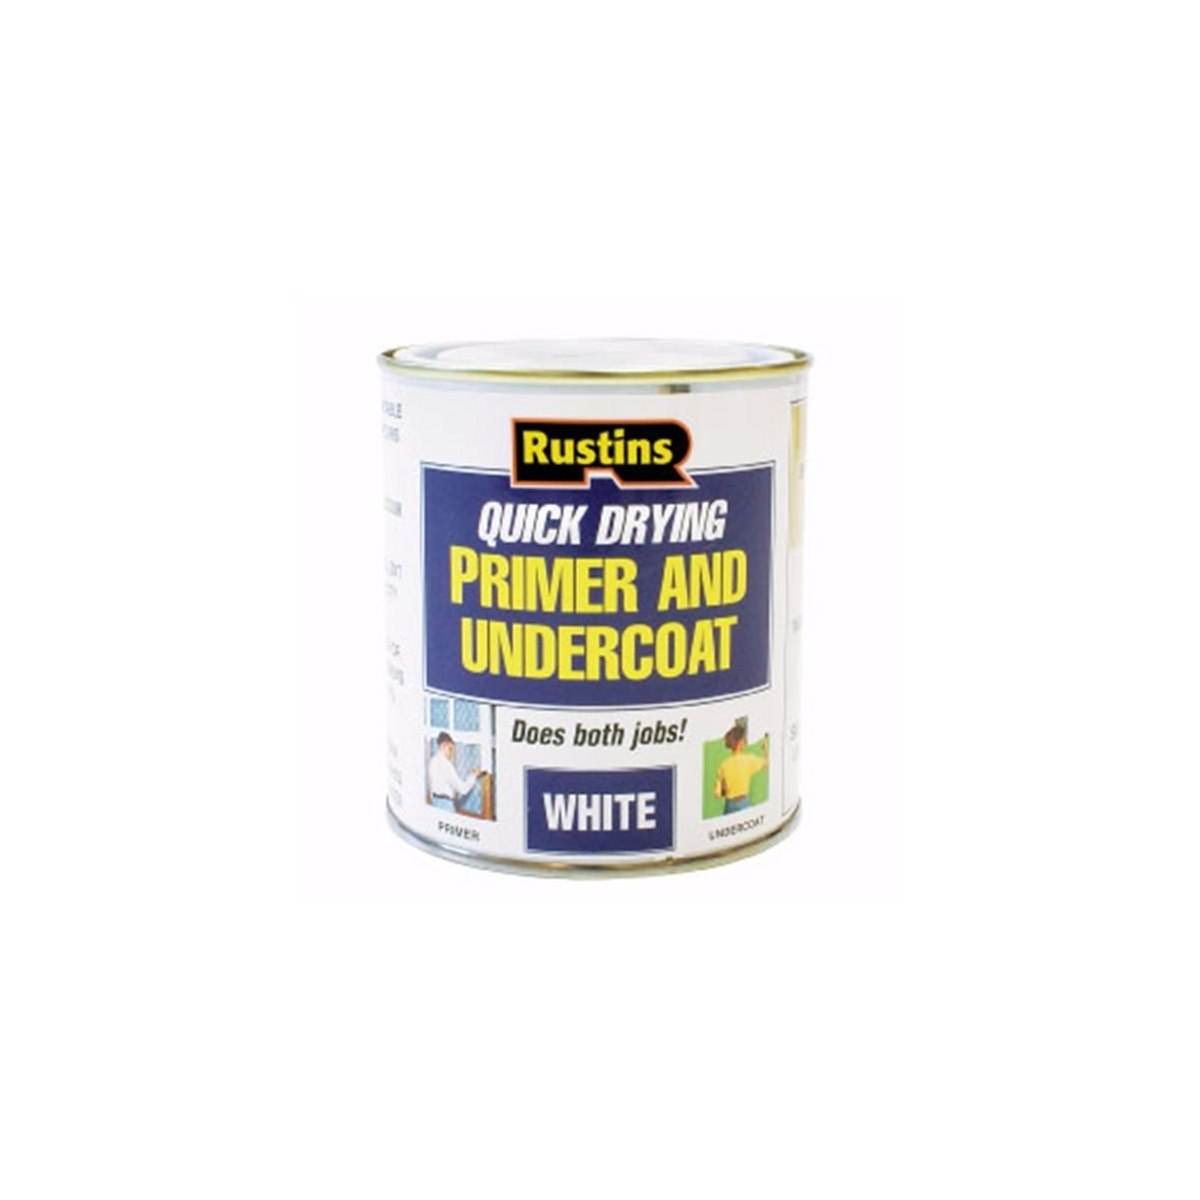 Rustins Quick Drying White Primer and Undercoat 2.5 Litre